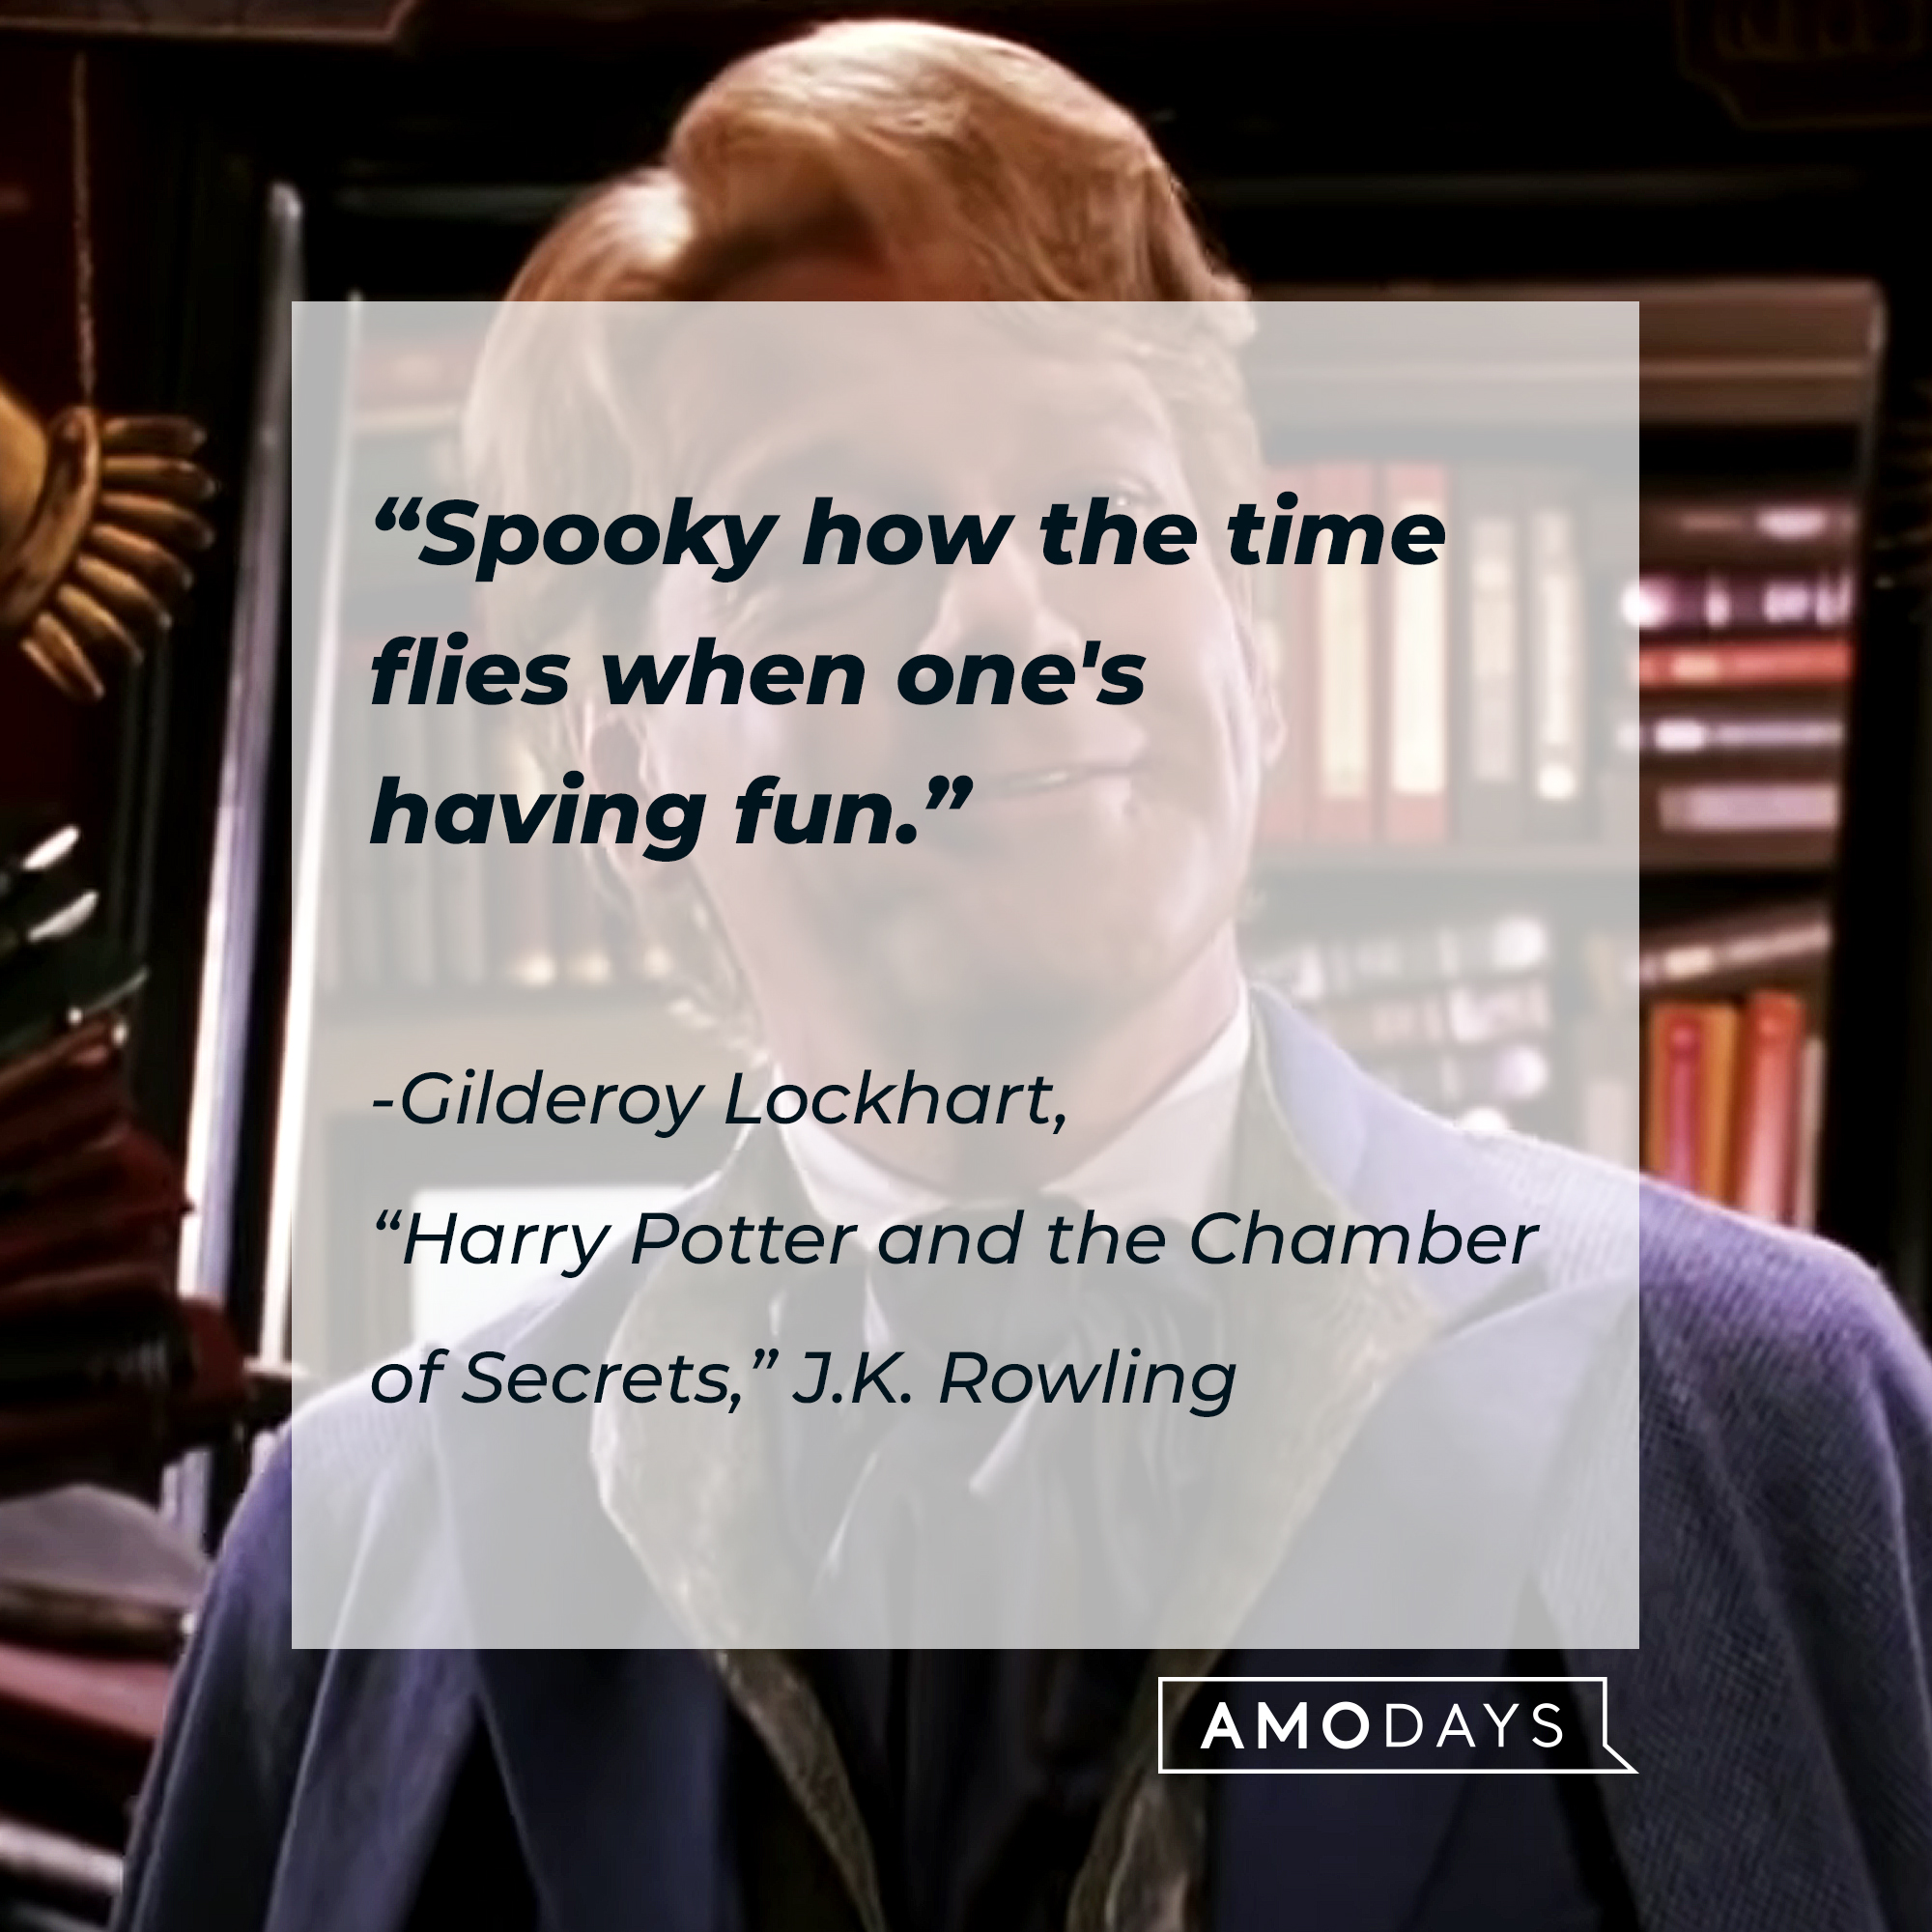 An image of  Gilderoy Lockhart with his quote: “Spooky how the time flies when one's having fun.” | Source: Youtube.com/harrypotter